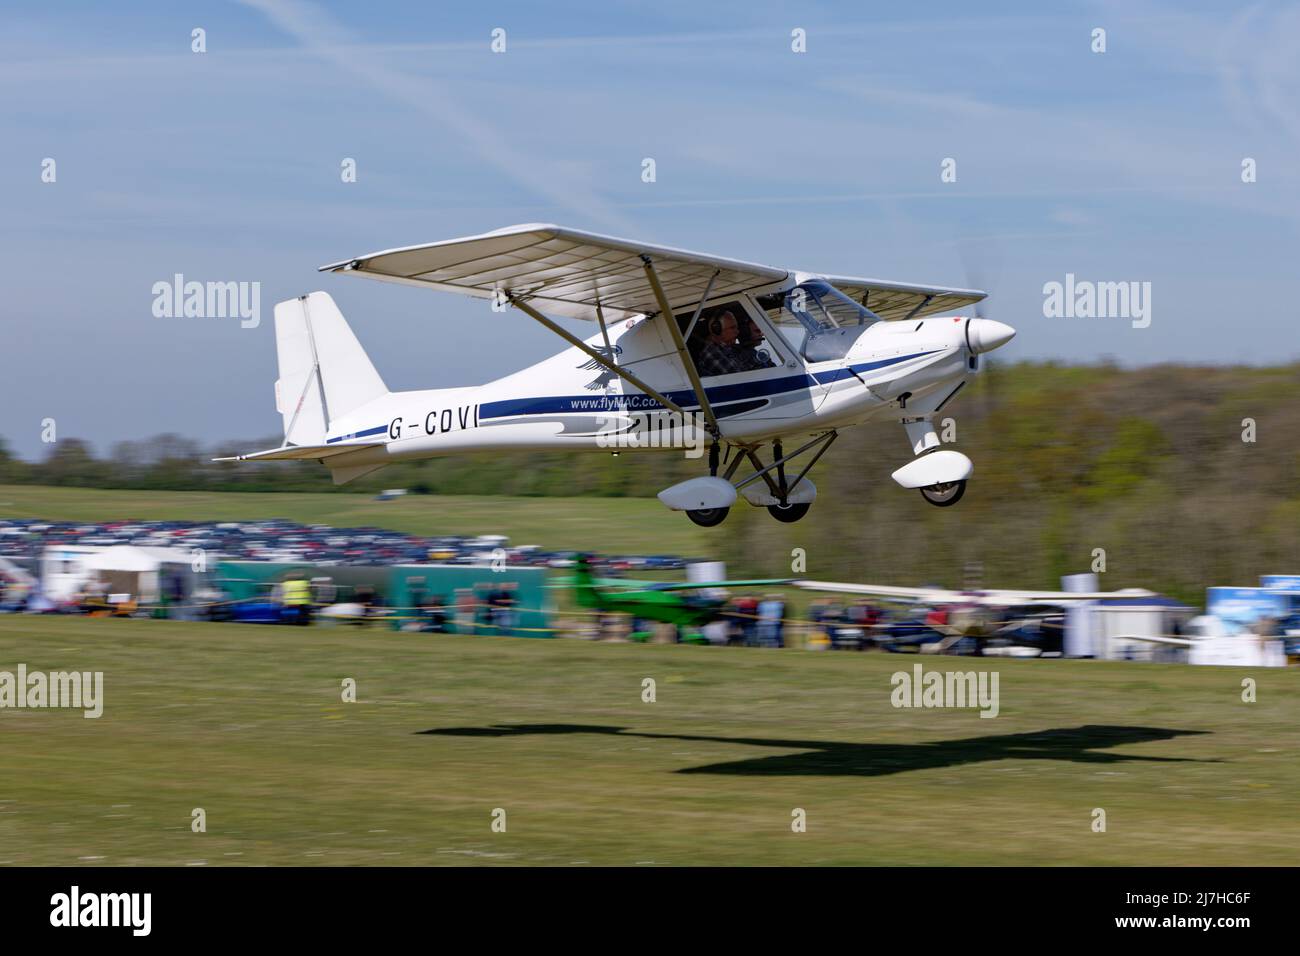 Aerosport Ikarus C42 G-CDVI microlight airplane of Airbourne Aviation takes off from Popham airfield near Basingstoke in Hampshire England Stock Photo